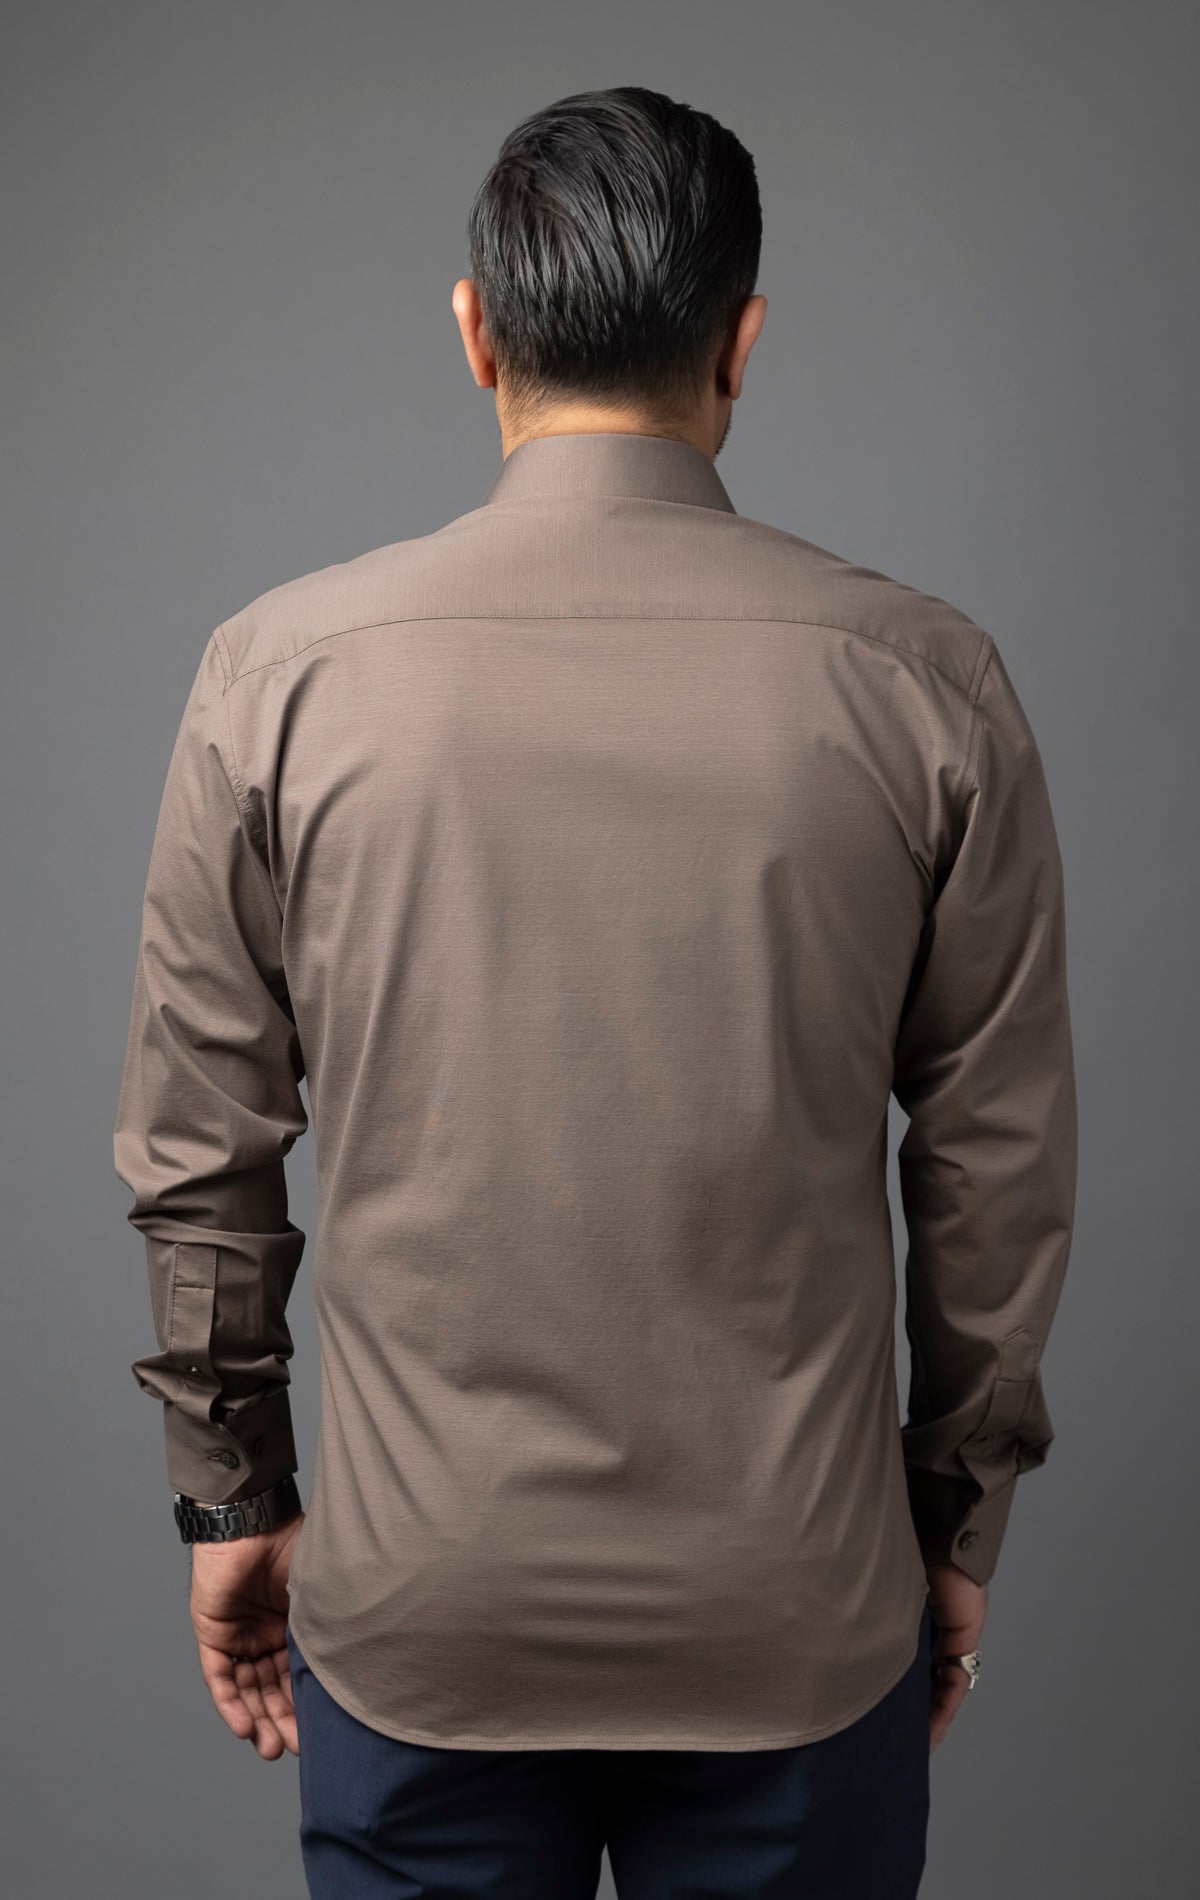 Men's formal brown button-up shirt with long sleeves.